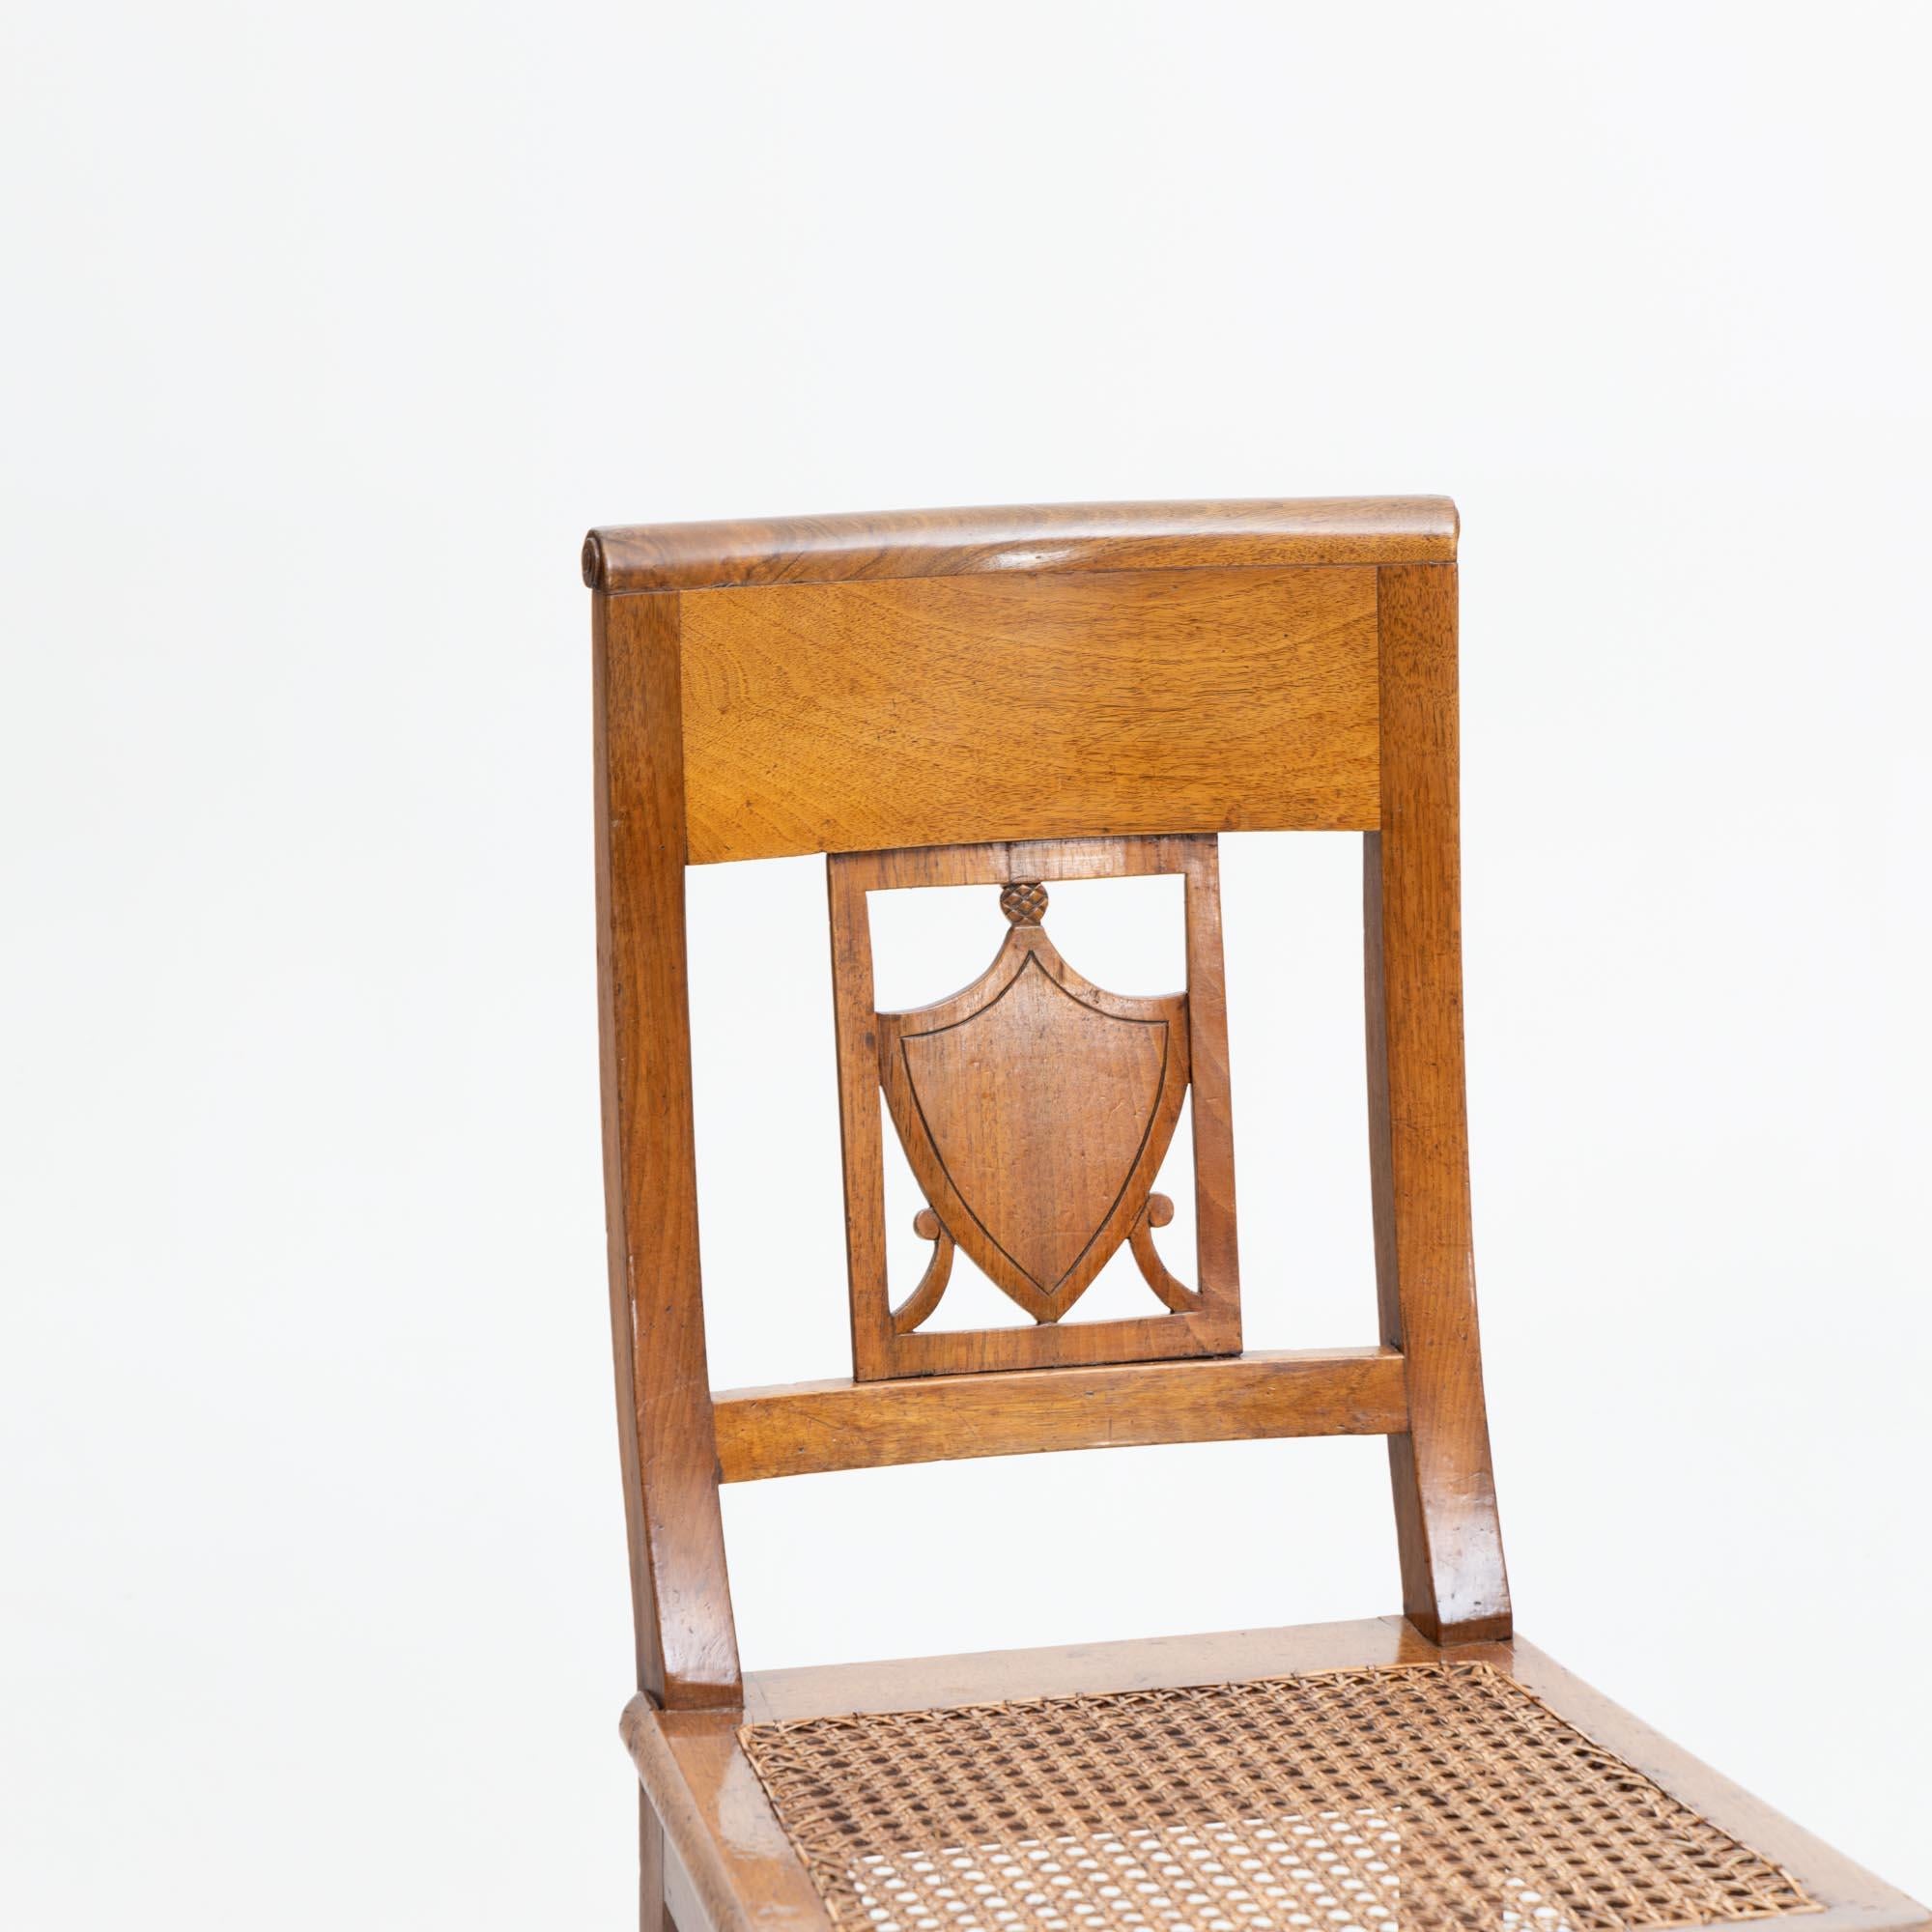 Wood Set of Four Dining Room Chairs, 19th Century